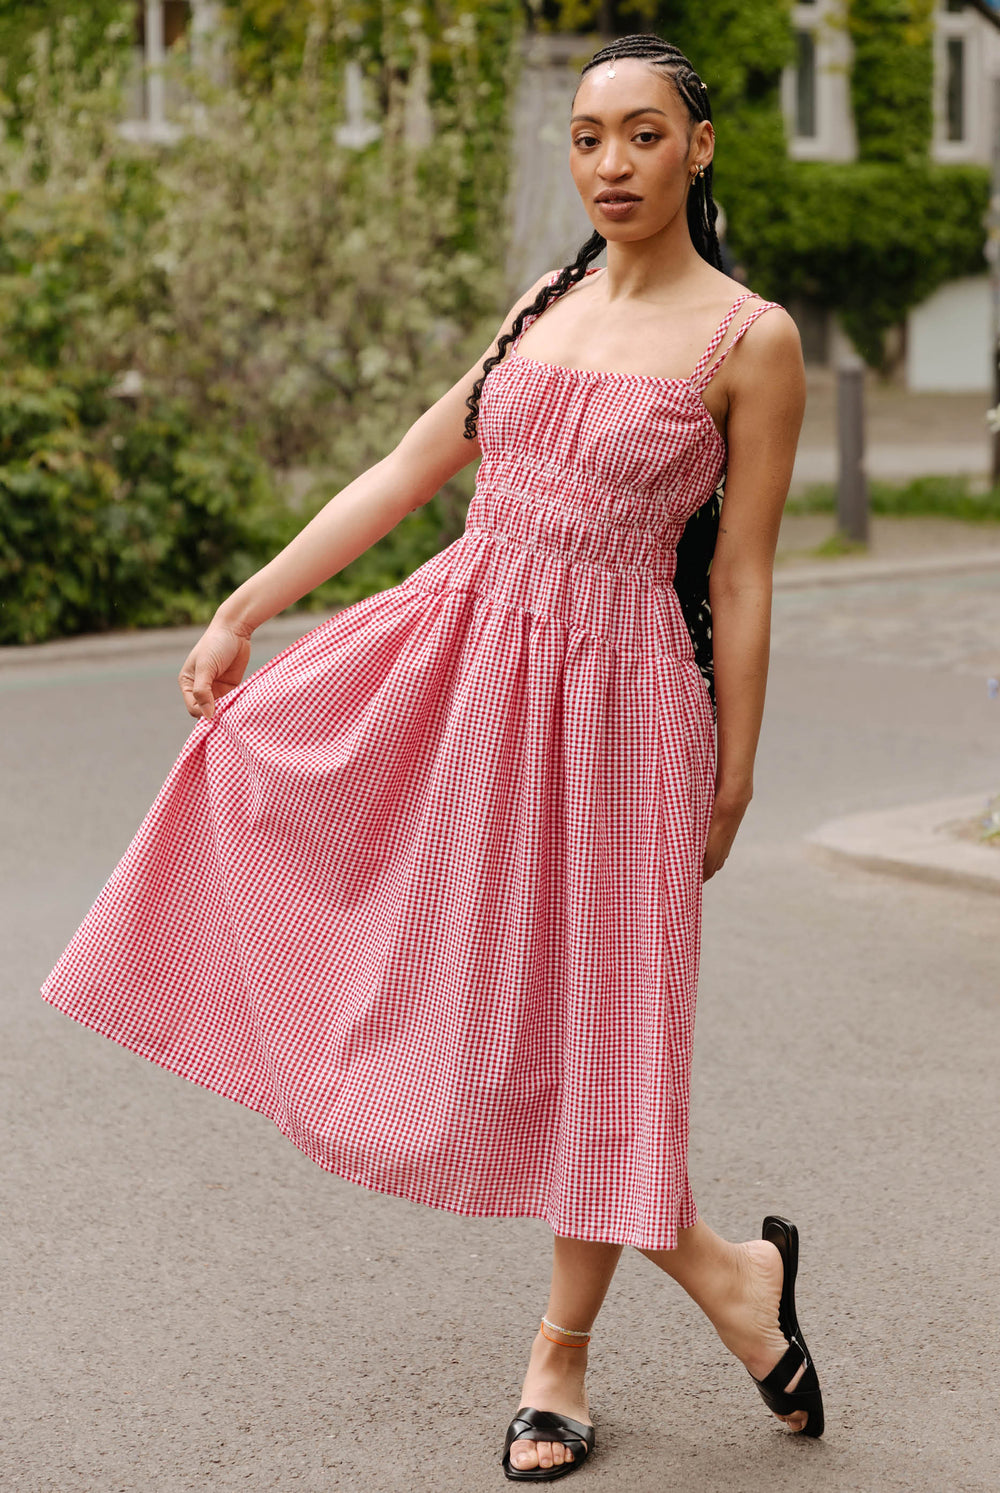 Woman wearing the Margo Dress sewing pattern from JULIANA MARTEJEVS on The Fold Line. A sundress pattern made in cotton fabric, featuring narrow straps, shirring, a gathered skirt, and midi length.